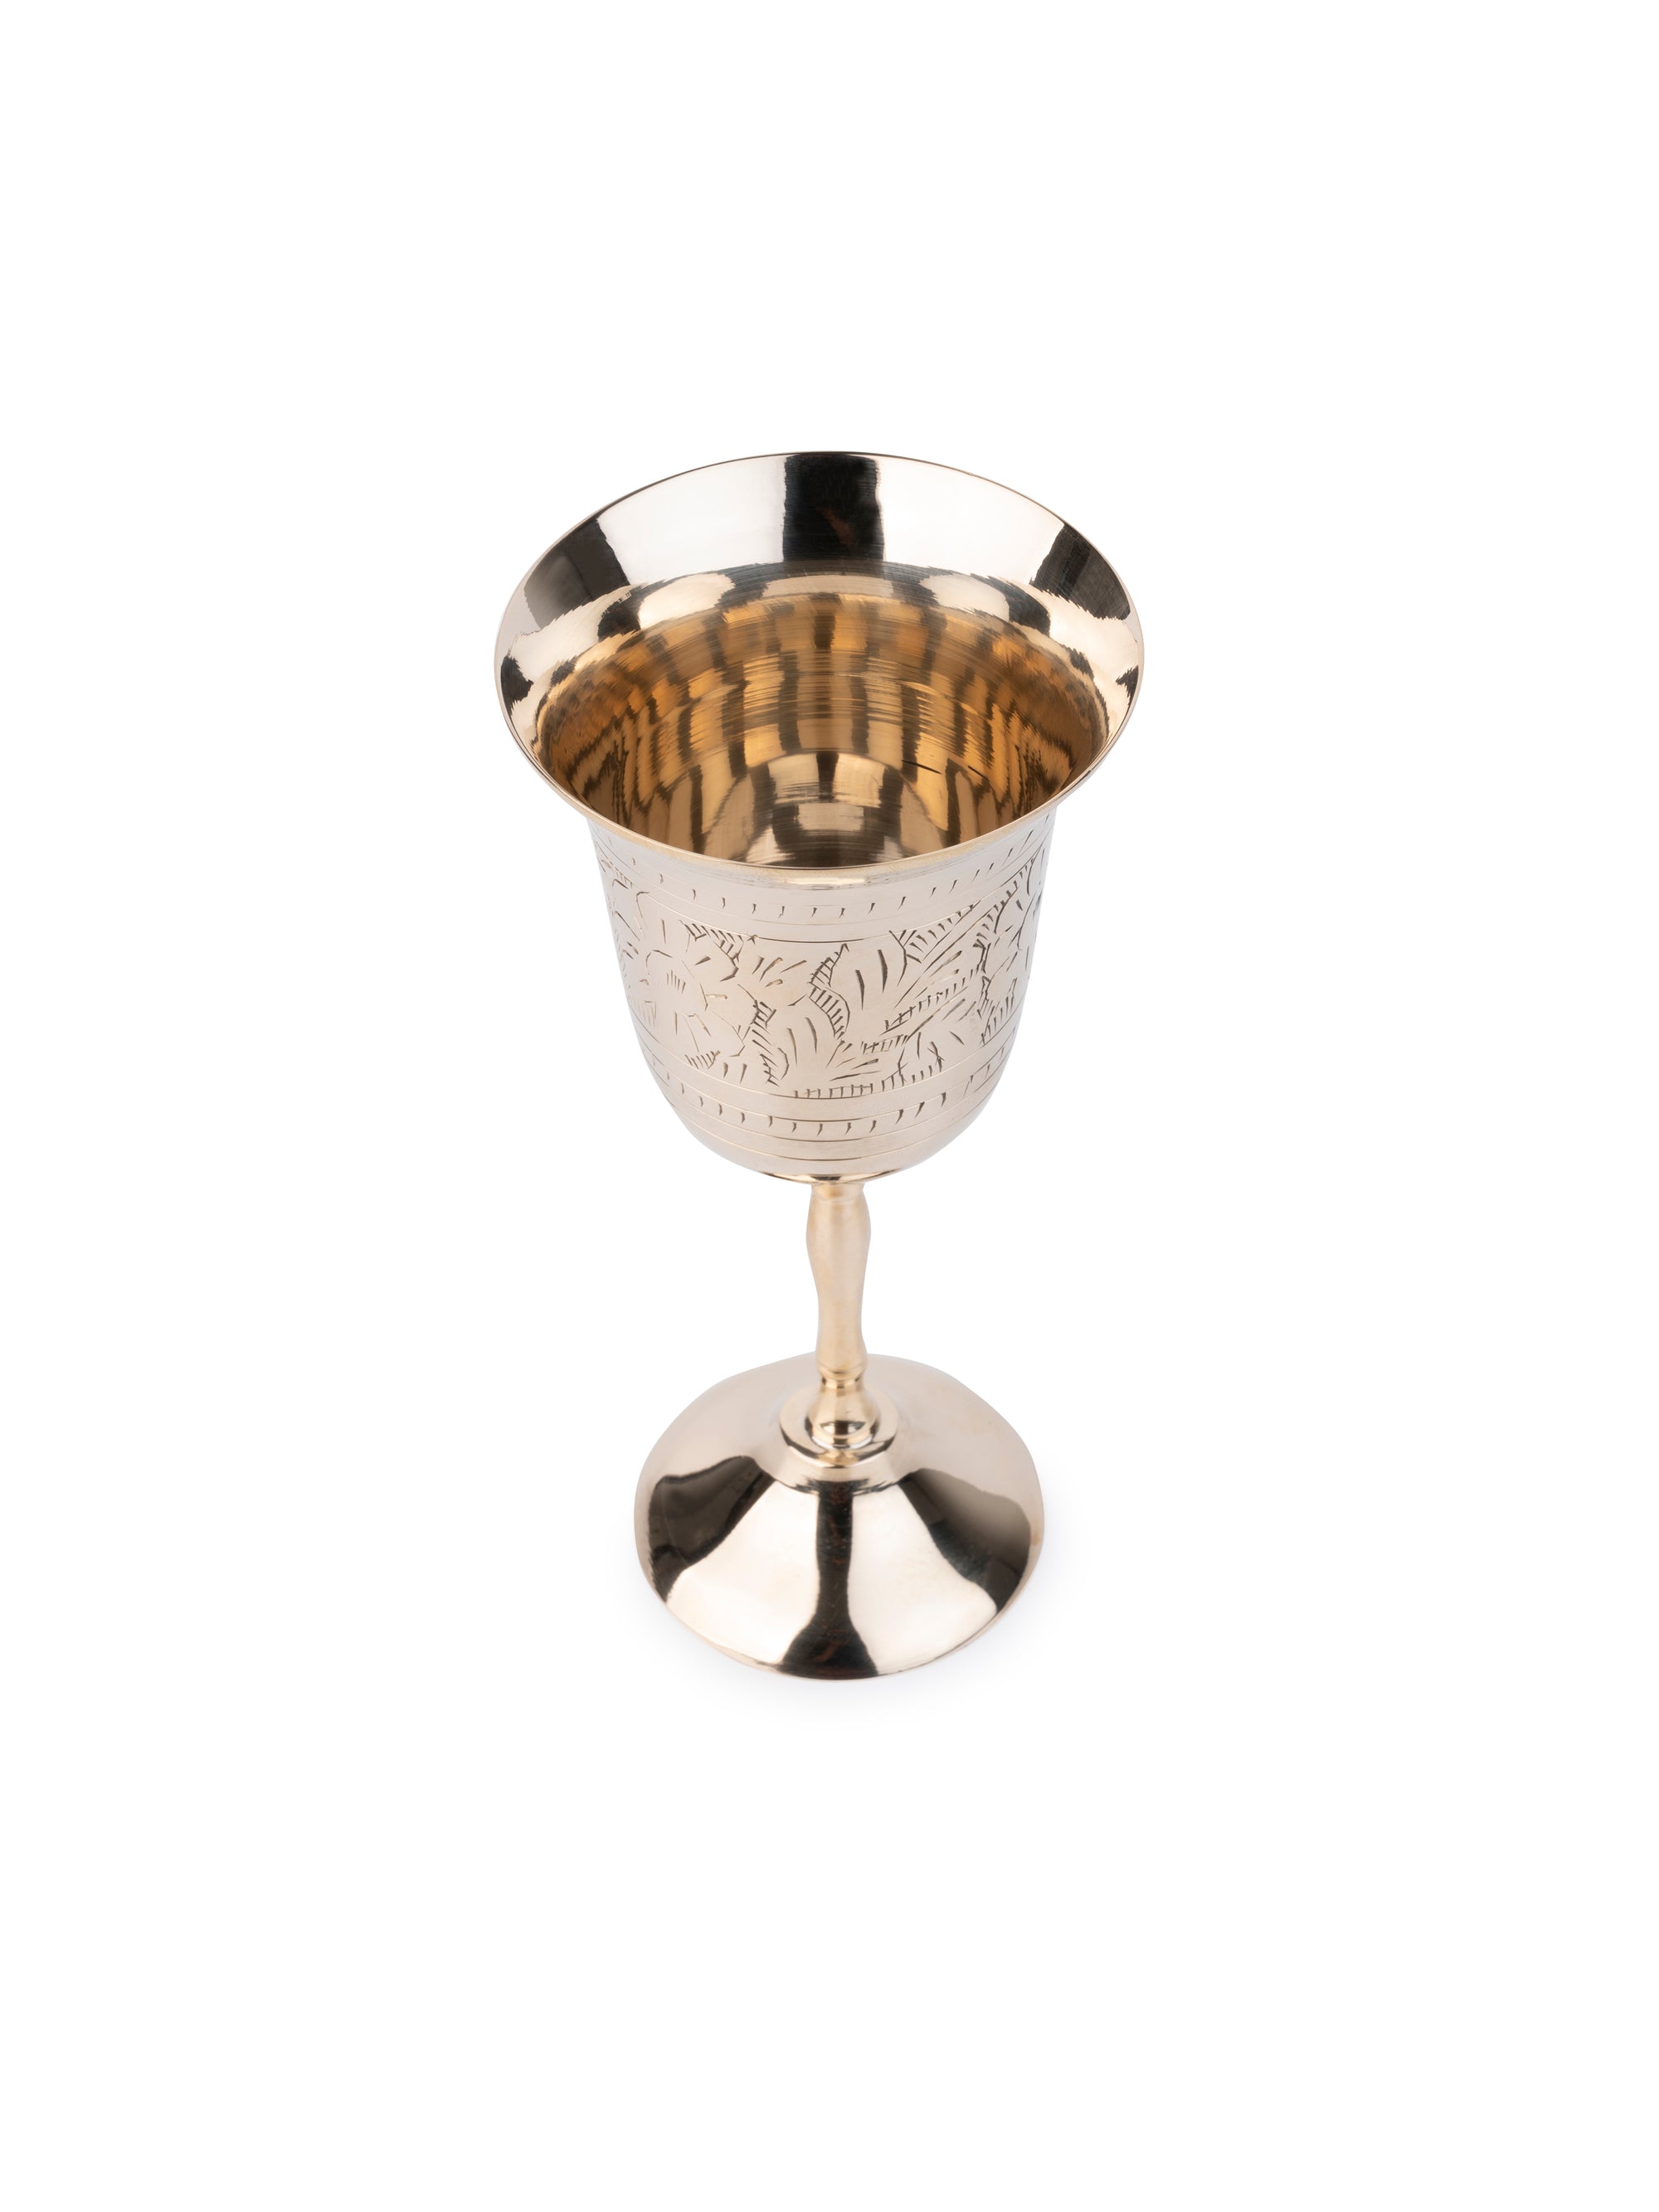 Elegant and Stylish Brass Crafted Cocktail / Wine / Beverage Glass